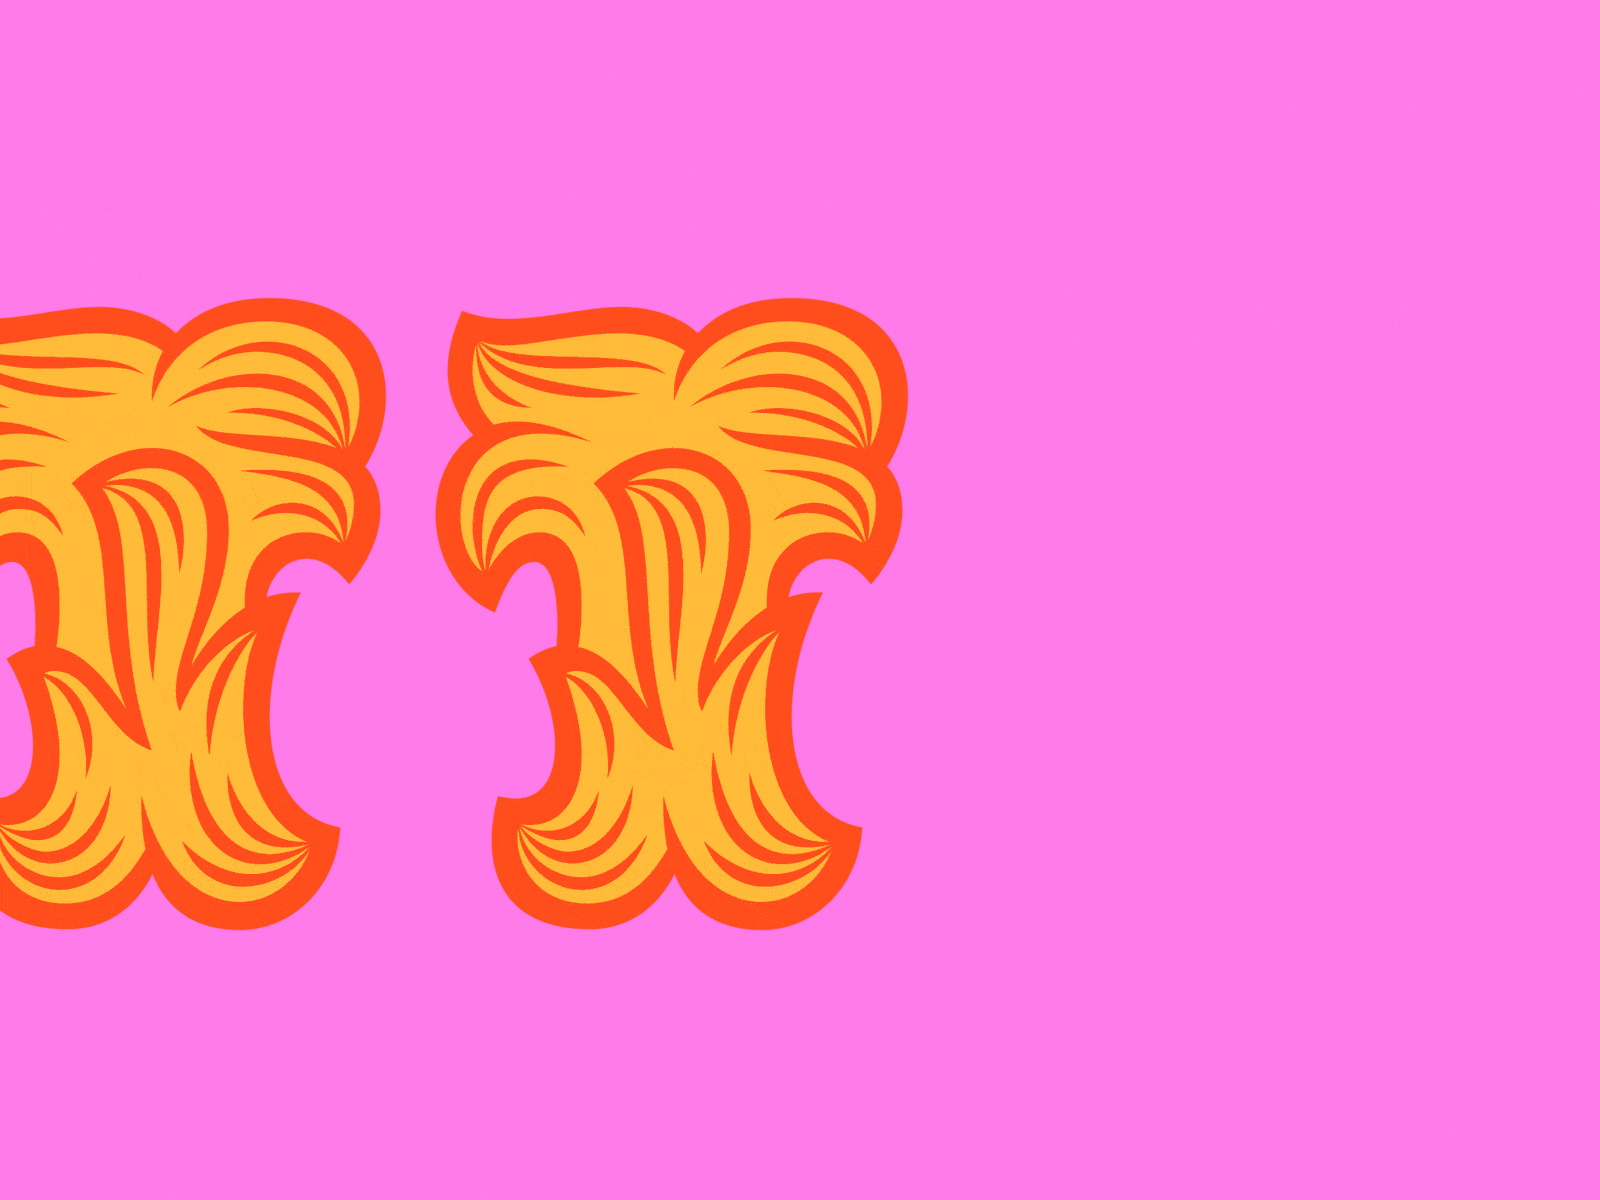 36 Days of Type / T 36 days of type 36daysoftype 36daysoftype08 36dot ae after effects animated type animation animography colors design kinetic kinetic type motion motion design motion graphic motion graphics type typography